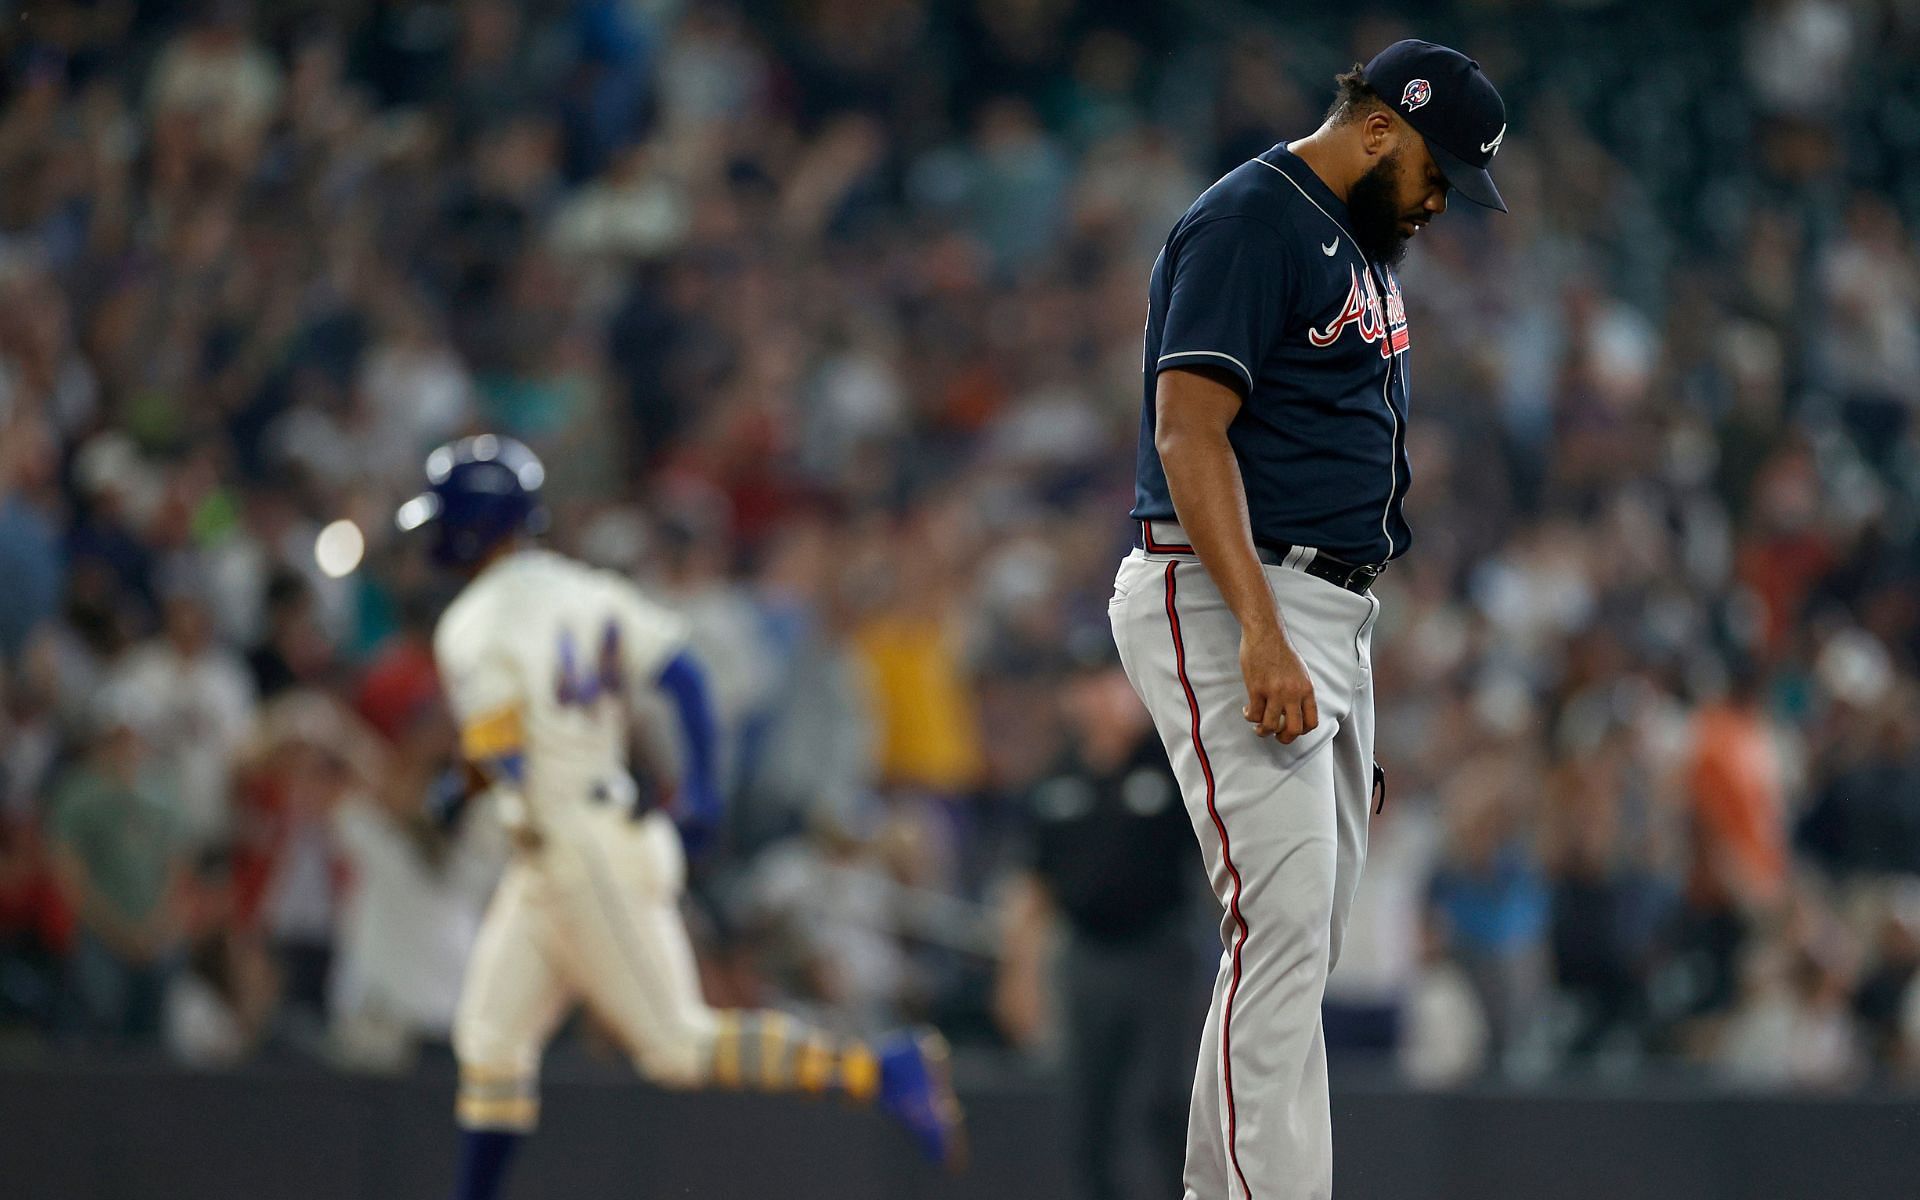 He's leading the league in saves - Atlanta Braves manager defends